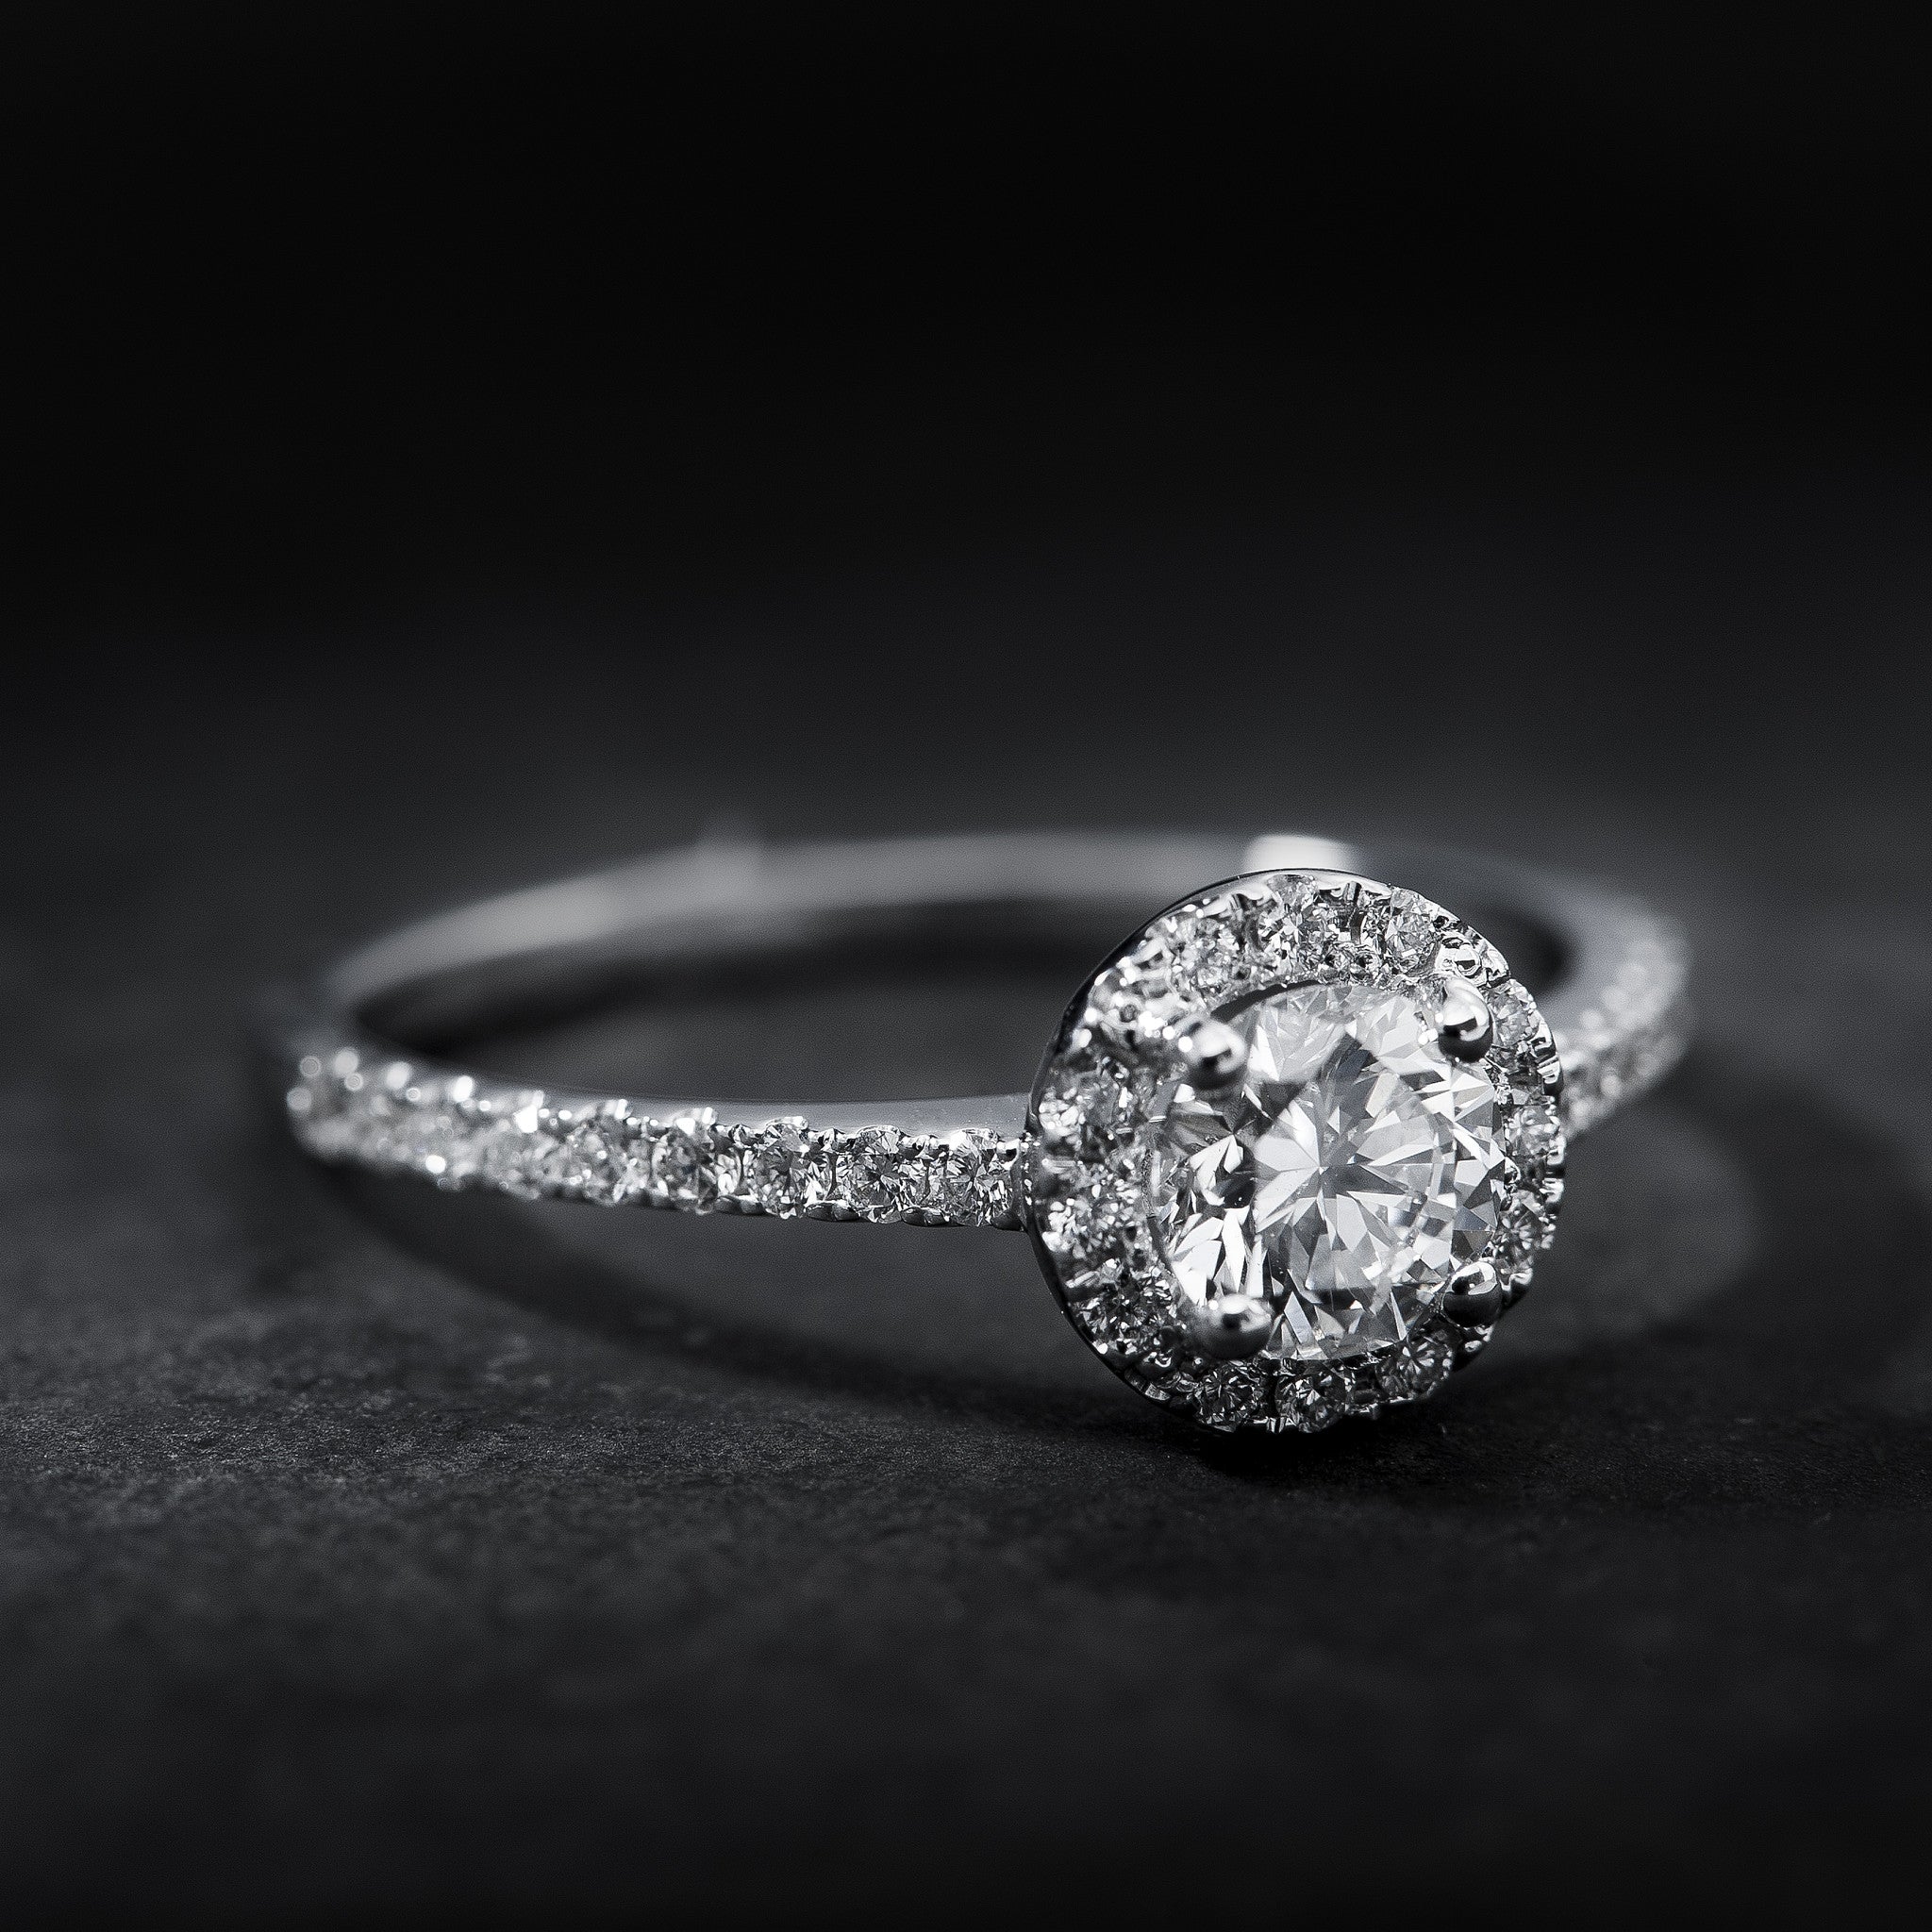 Platinum Ring with White Diamonds in Pave Setting - The Diamond Setter